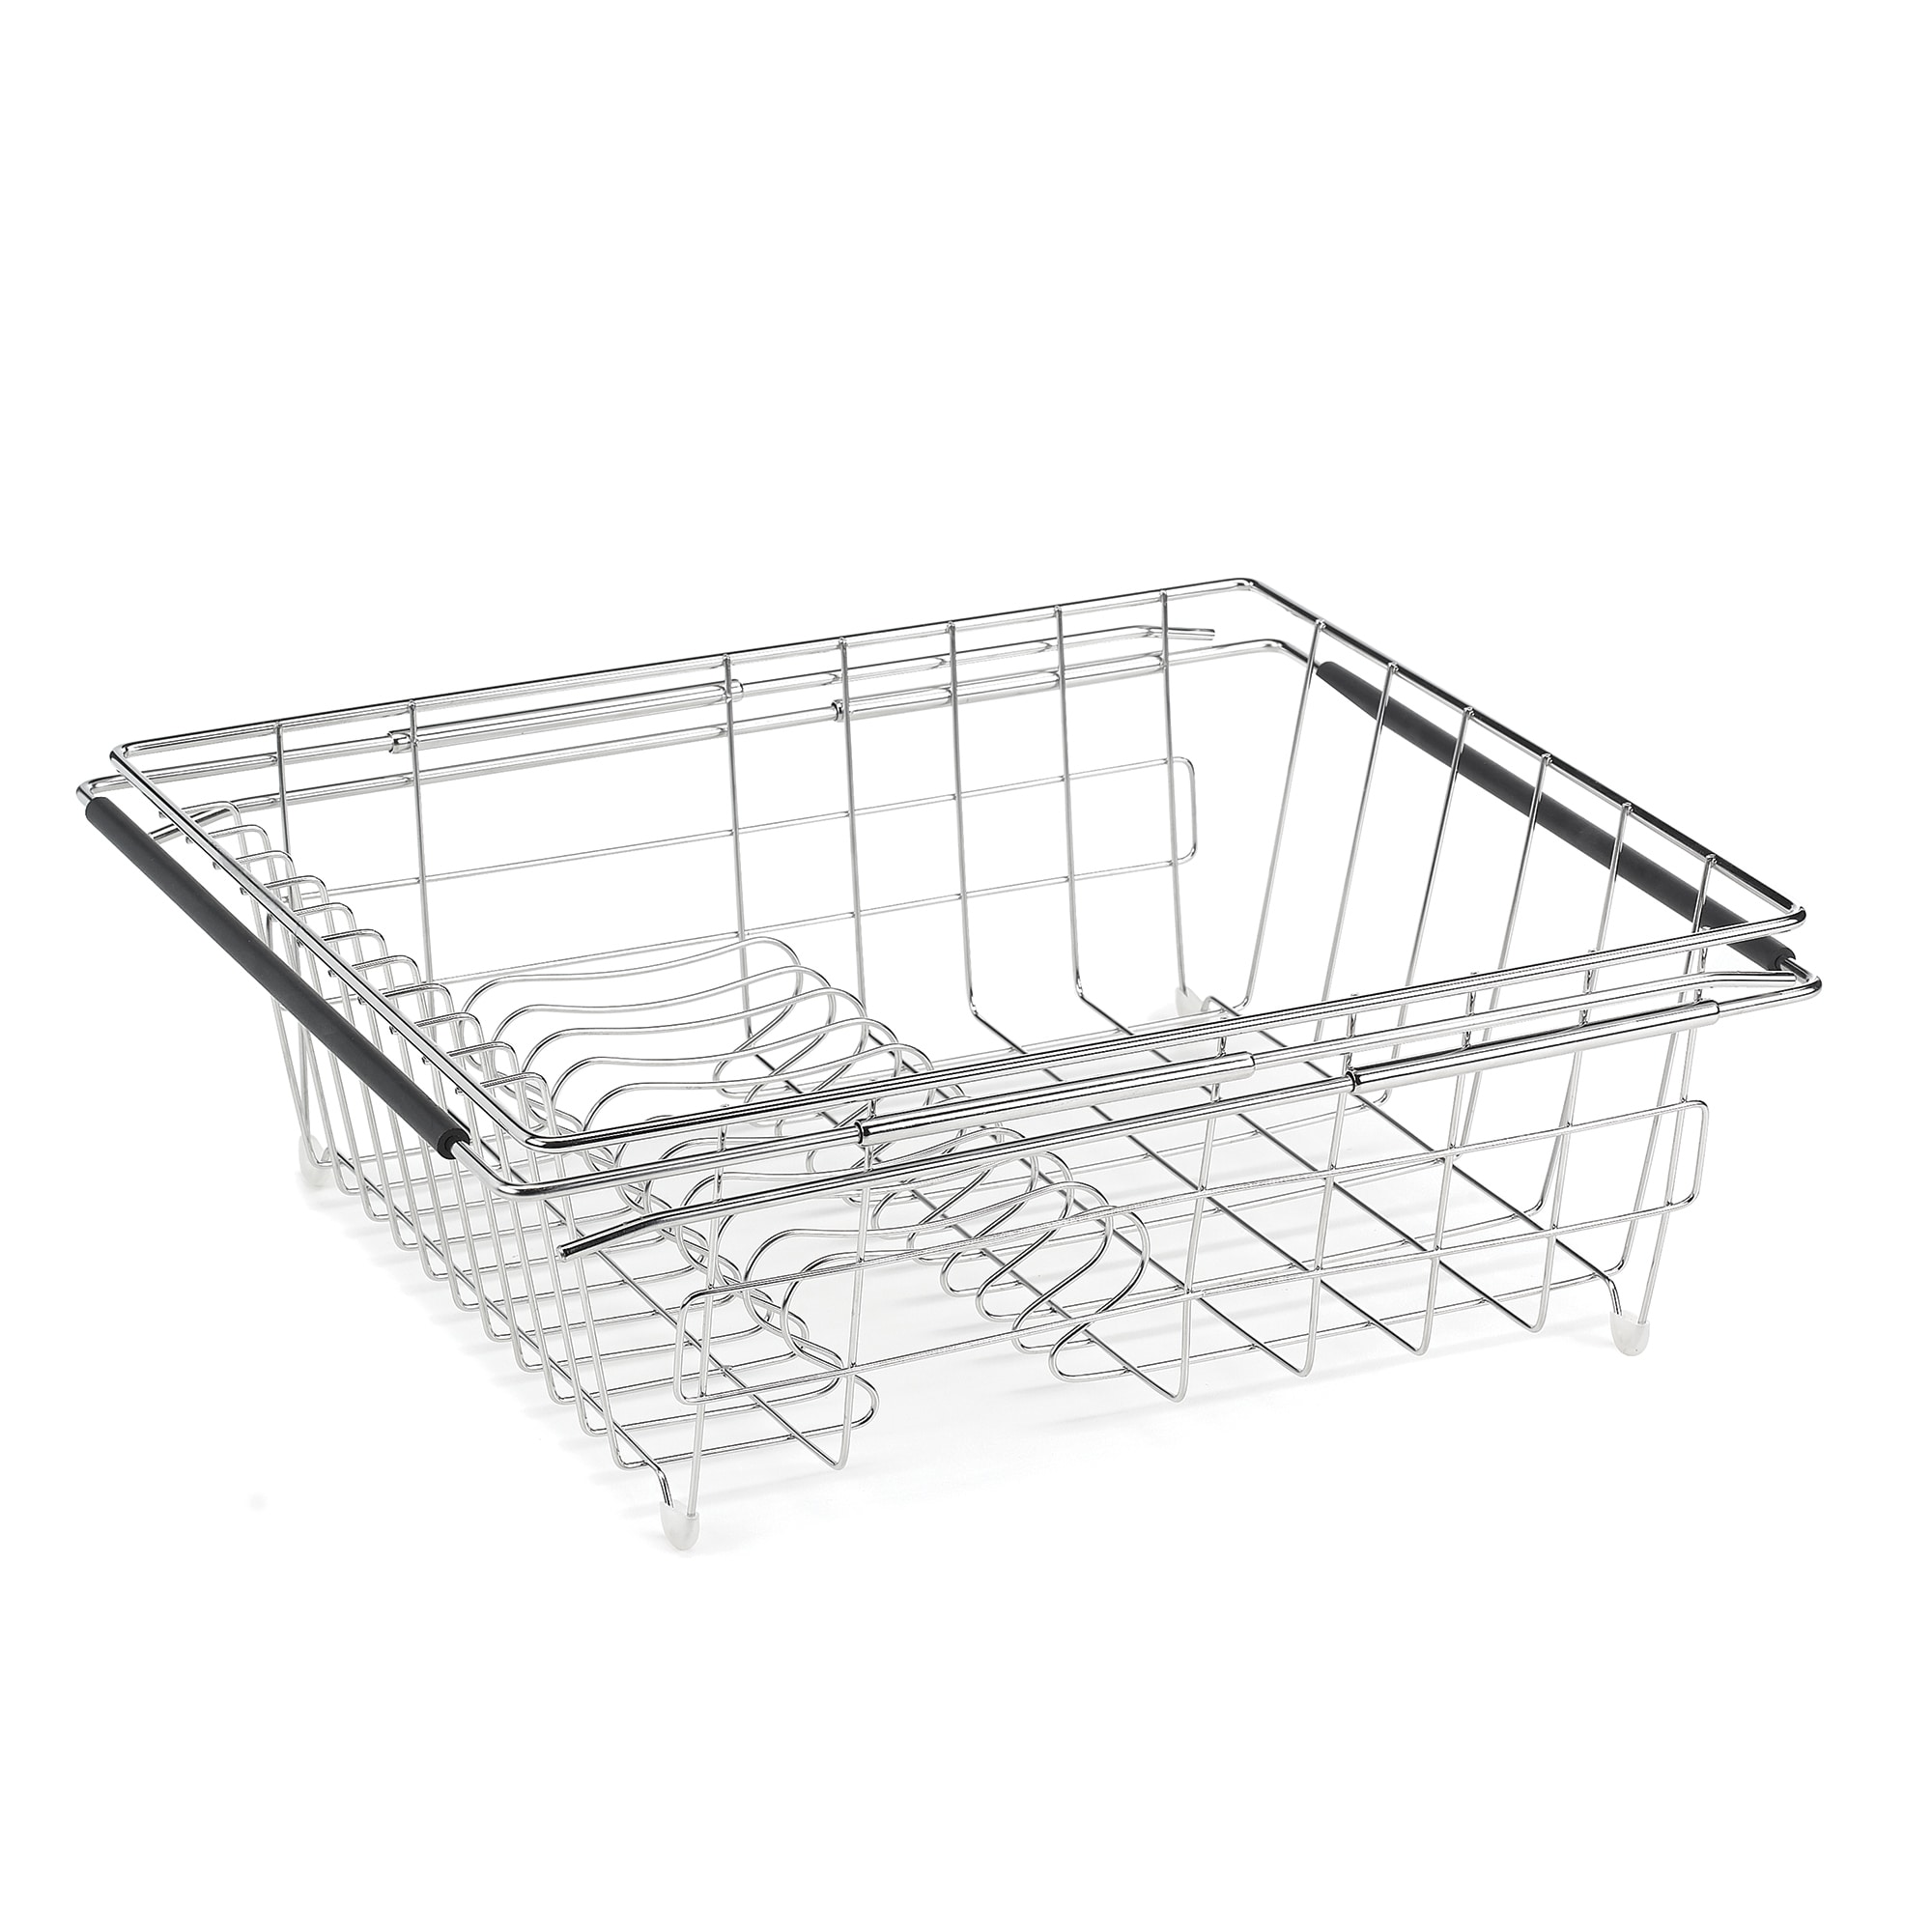 J&V Textiles 23 in. Chrome Fresh Stainless Steel 2-Tier Dish Rack with Utensil Holder and Cutting Board Holder